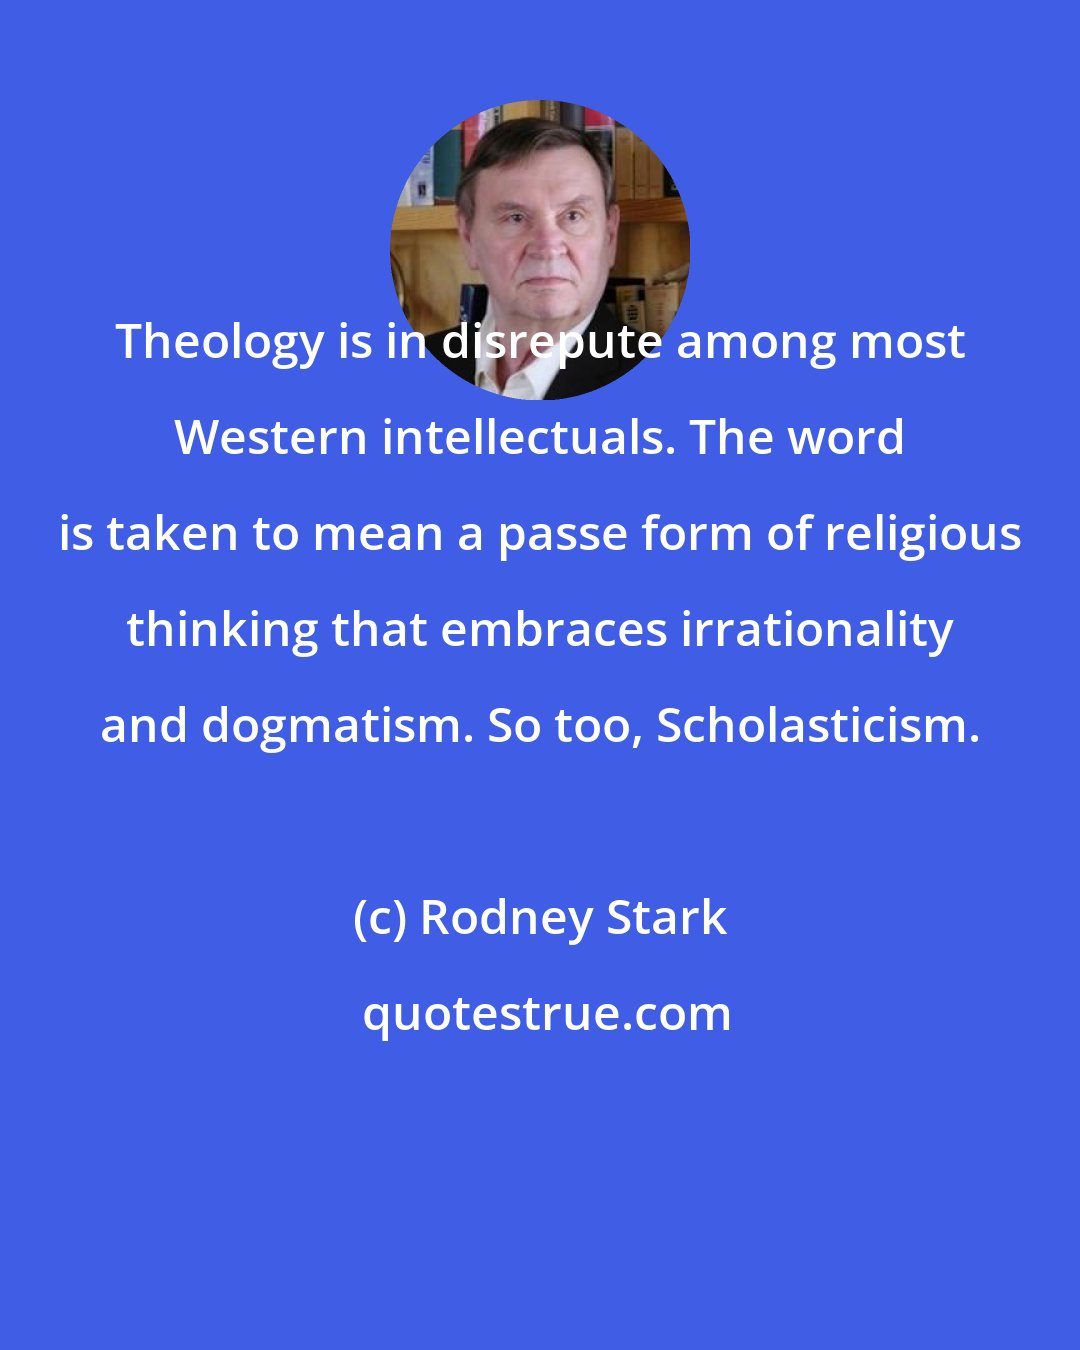 Rodney Stark: Theology is in disrepute among most Western intellectuals. The word is taken to mean a passe form of religious thinking that embraces irrationality and dogmatism. So too, Scholasticism.